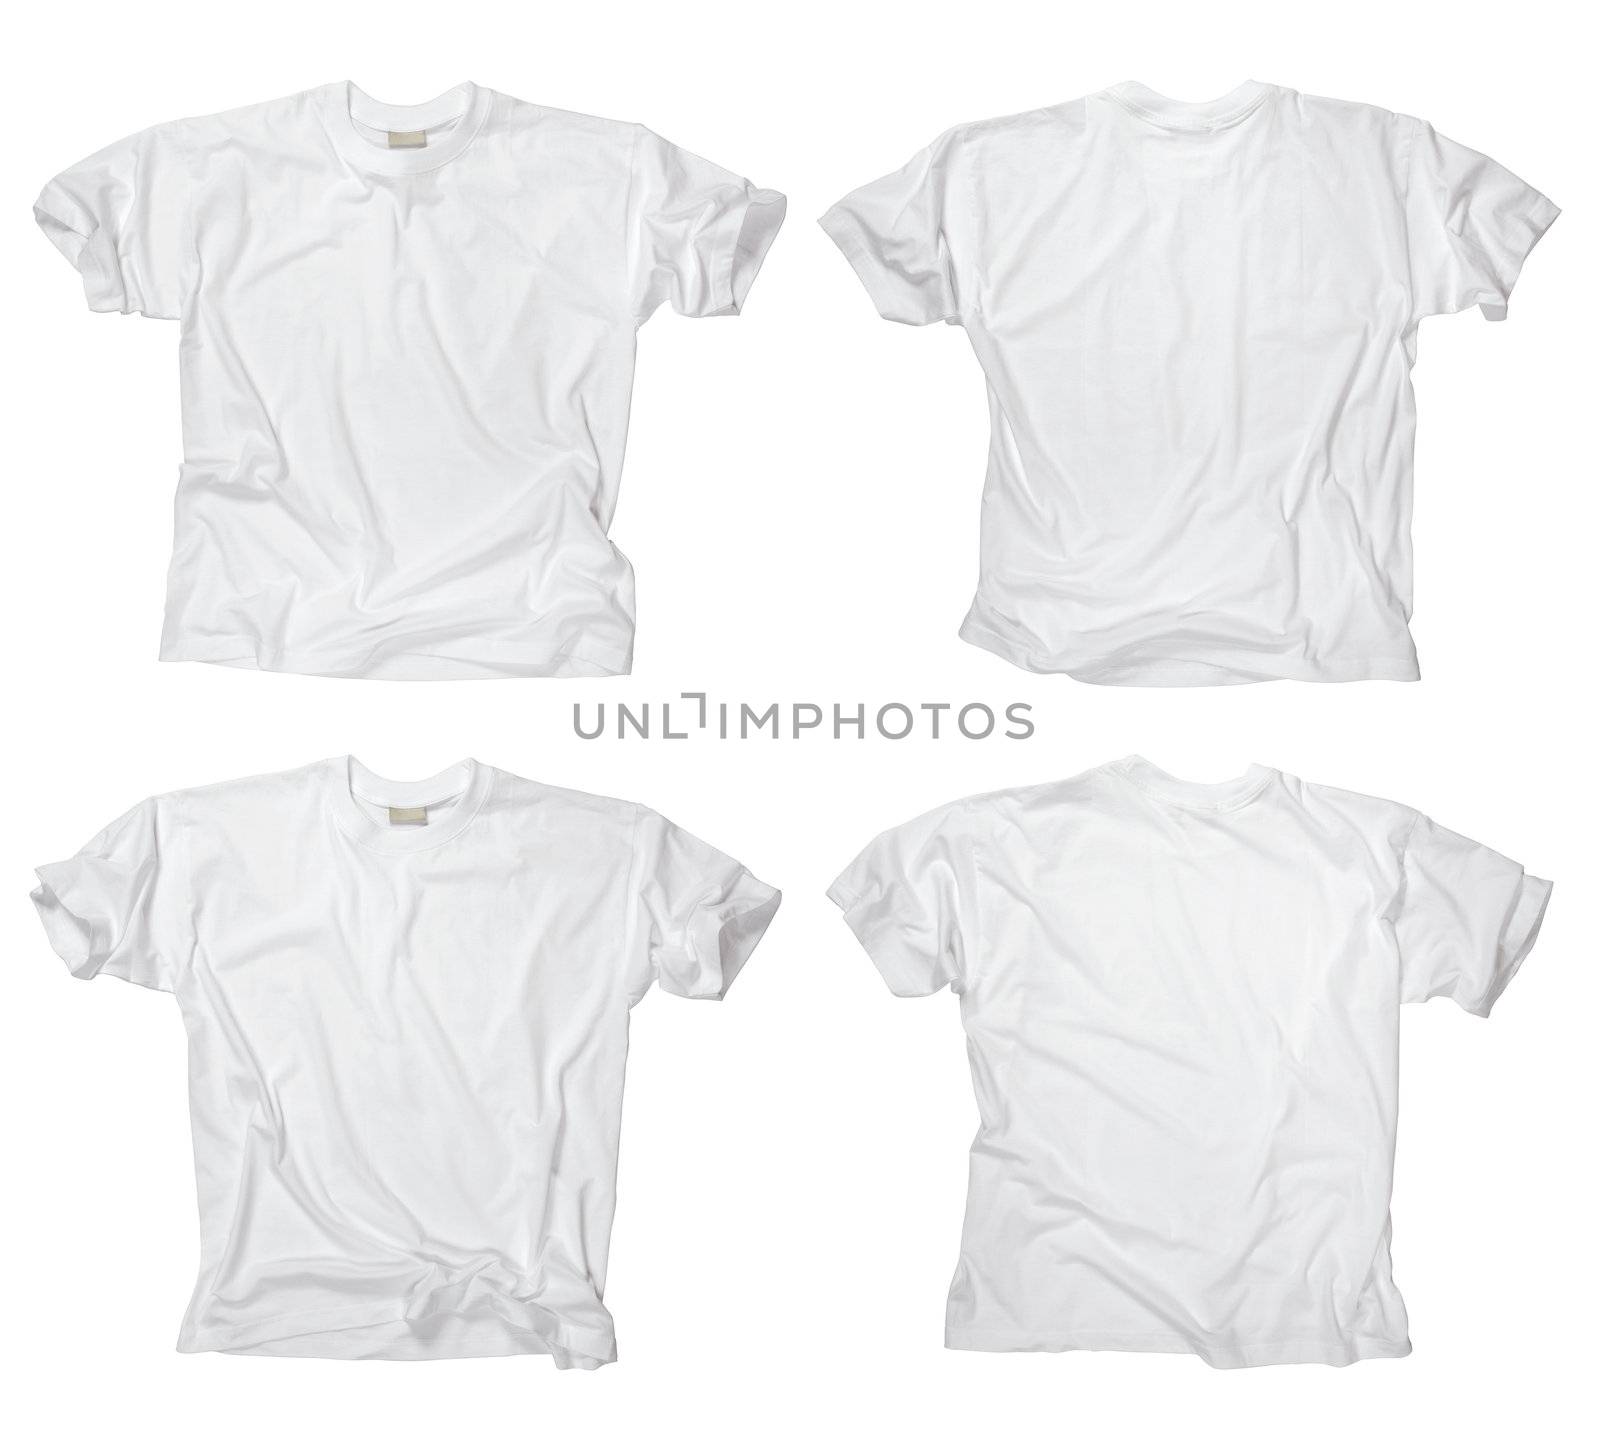 Blank white t-shirts front and back by sumners